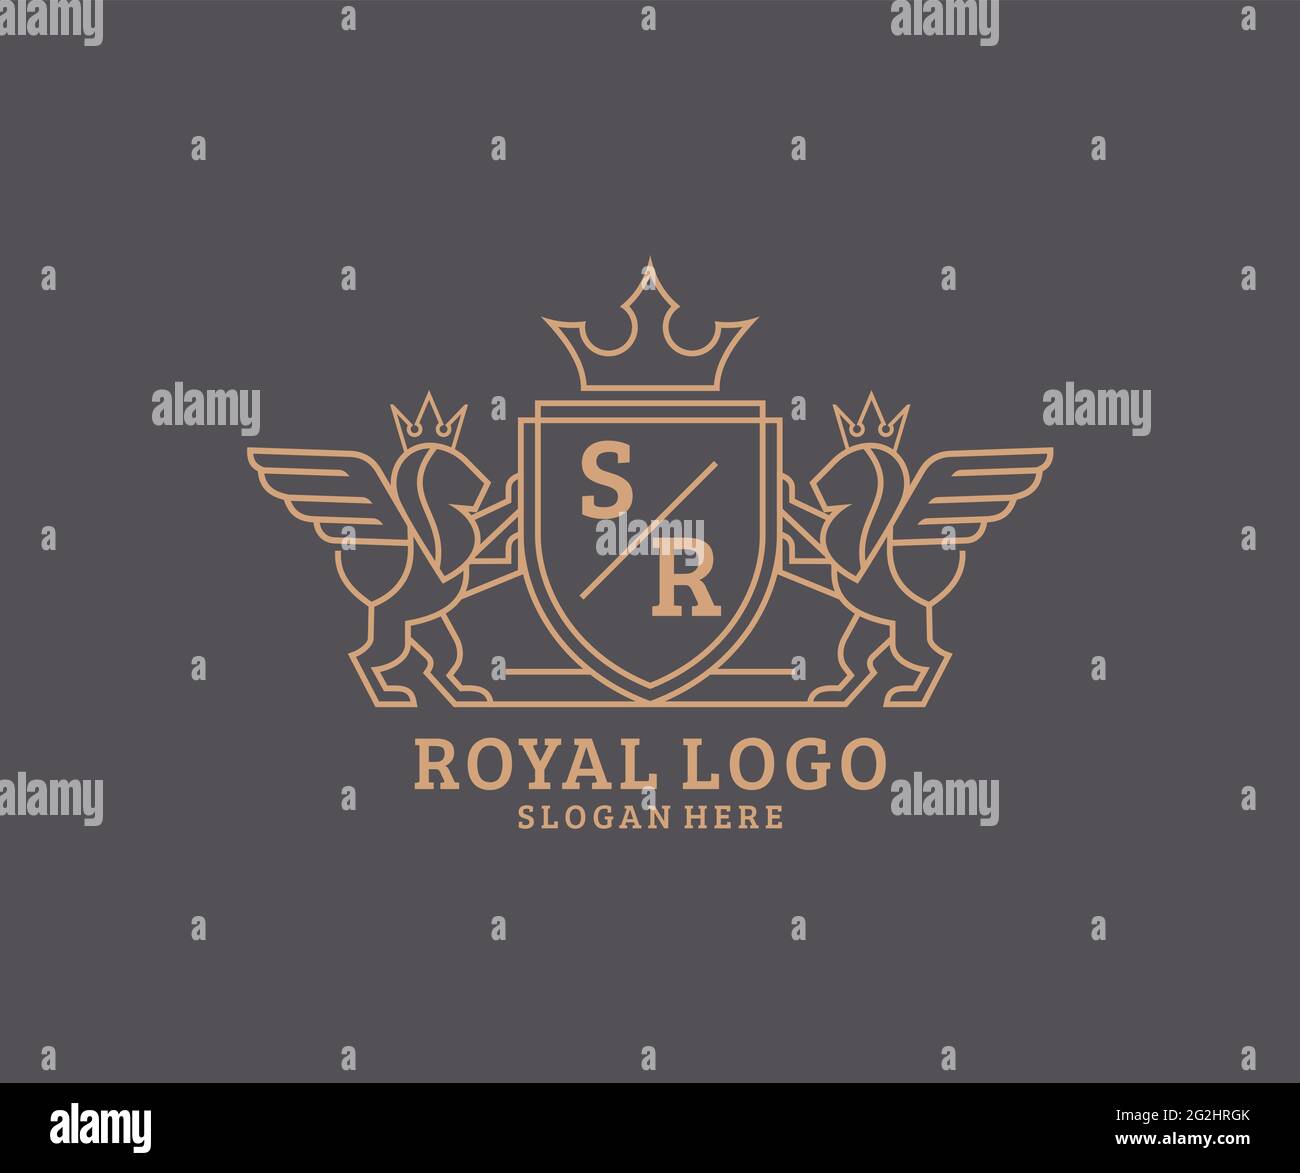 SR Letter Lion Royal Luxury Heraldic,Crest Logo template in vector art for Restaurant, Royalty, Boutique, Cafe, Hotel, Heraldic, Jewelry, Fashion and Stock Vector